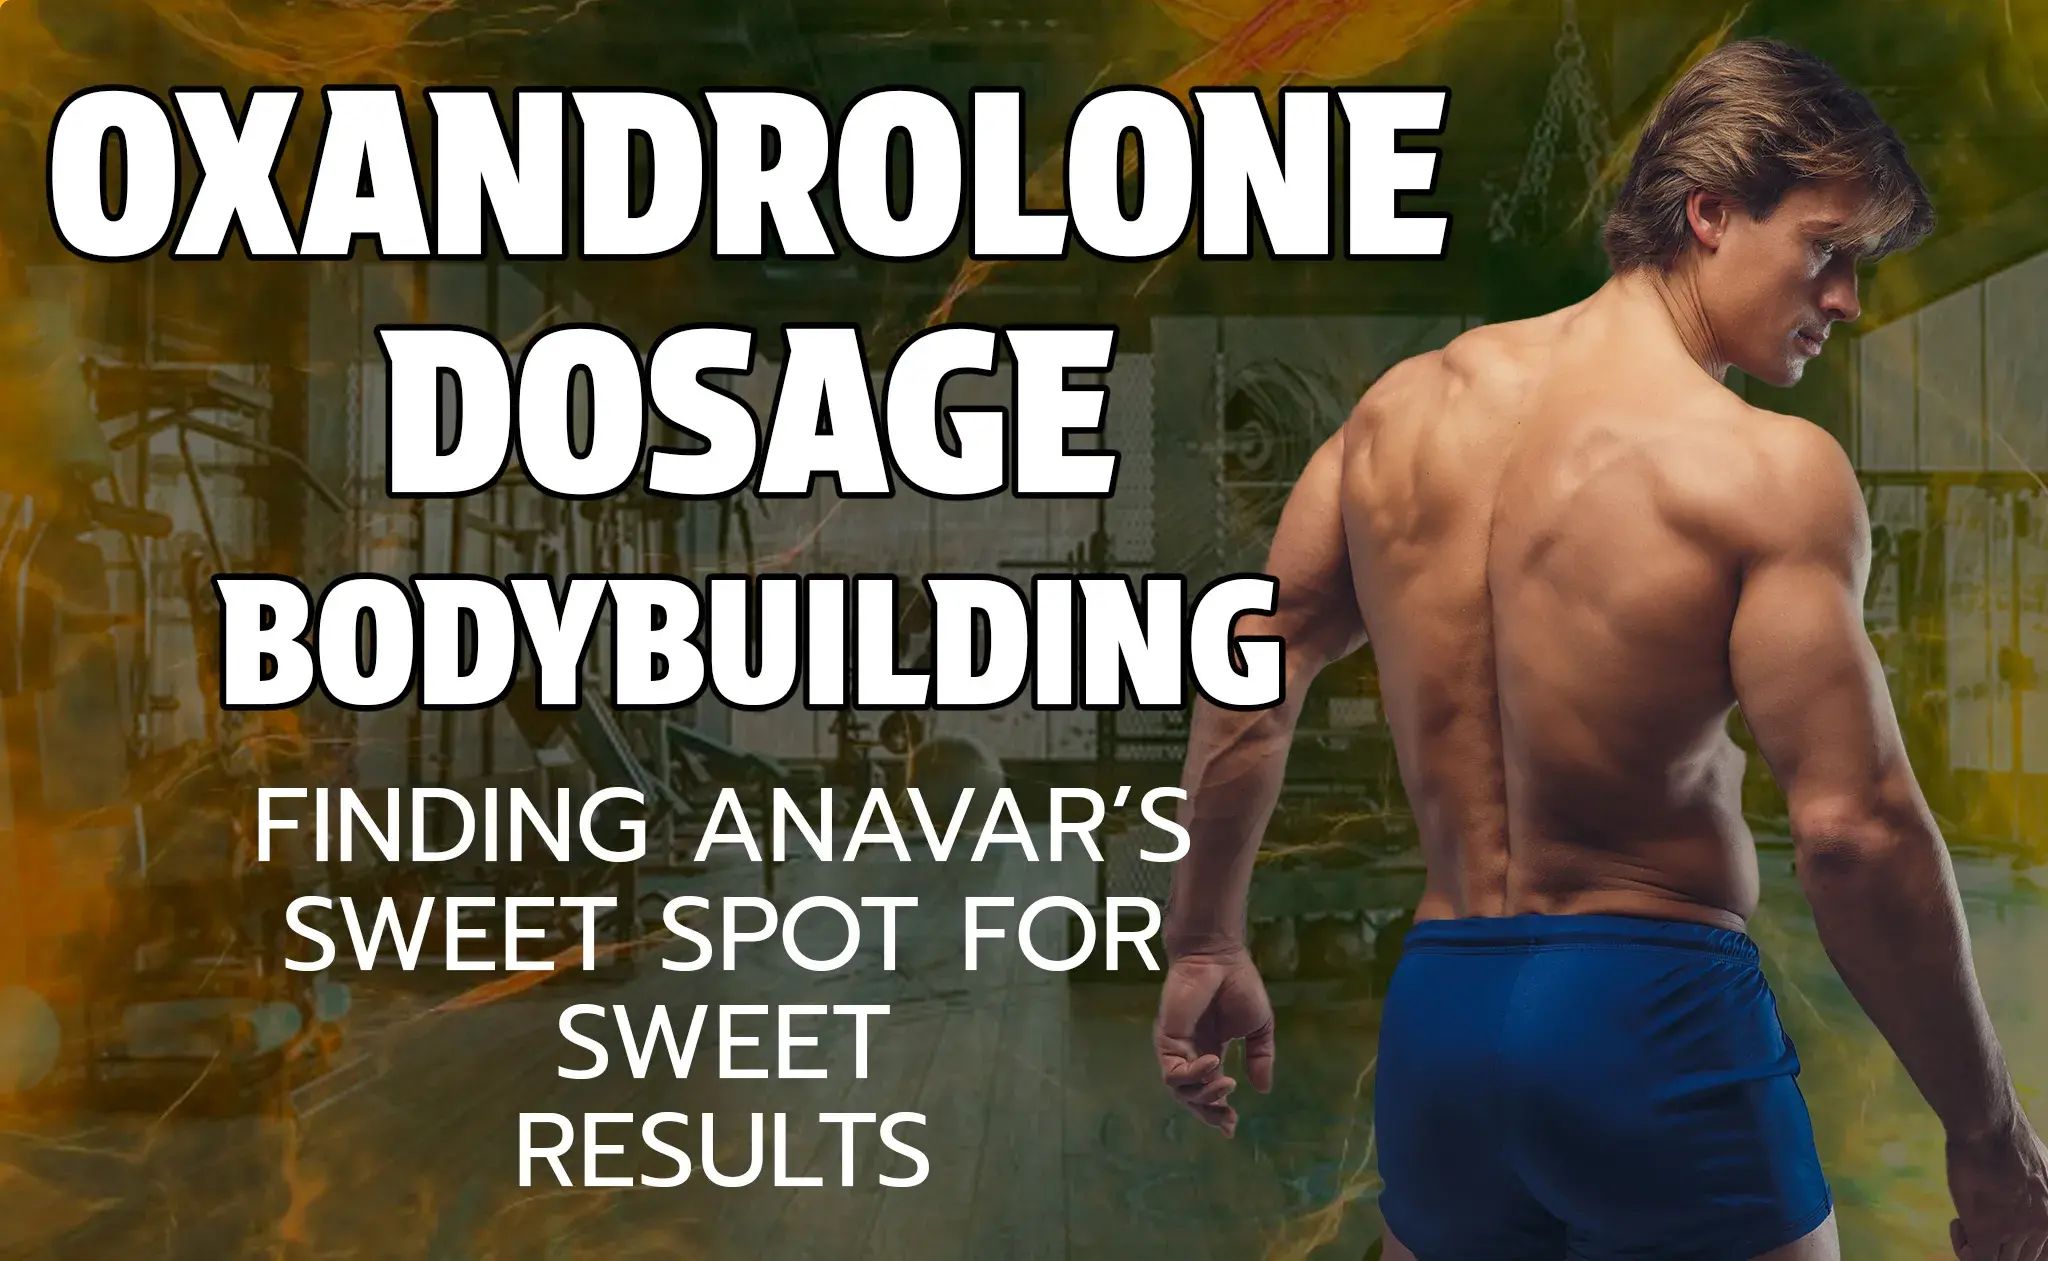 Oxandrolone Dosage Bodybuilding – Finding Anavar’s Sweet Spot for Sweet Results